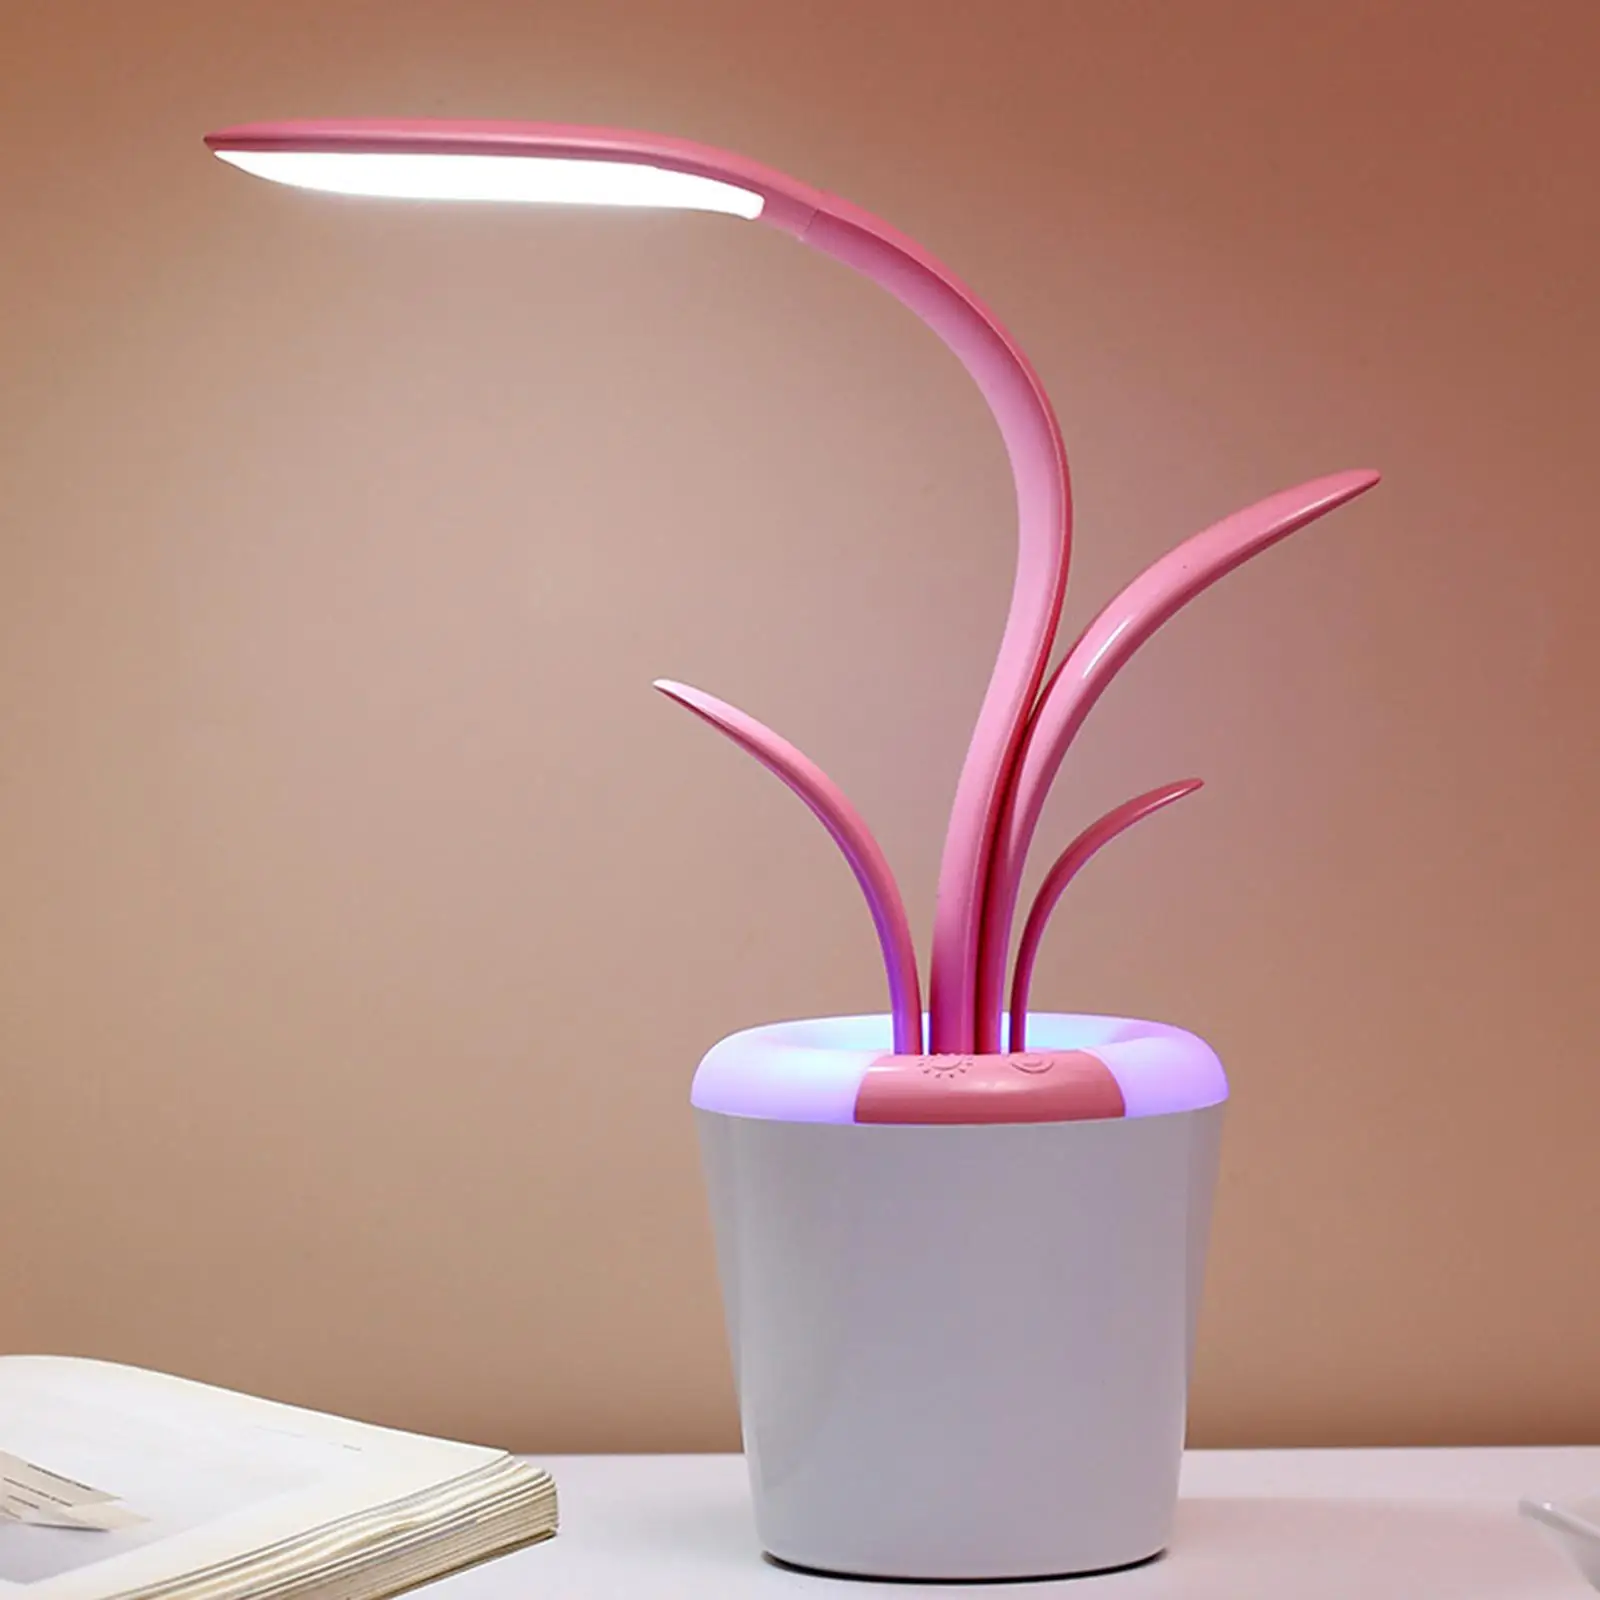 Plant Shape LED Desk Lamp Study Nightstand Bedside Flexible Eye Protection USB Table Light for Home Office Bedroom Dormitory